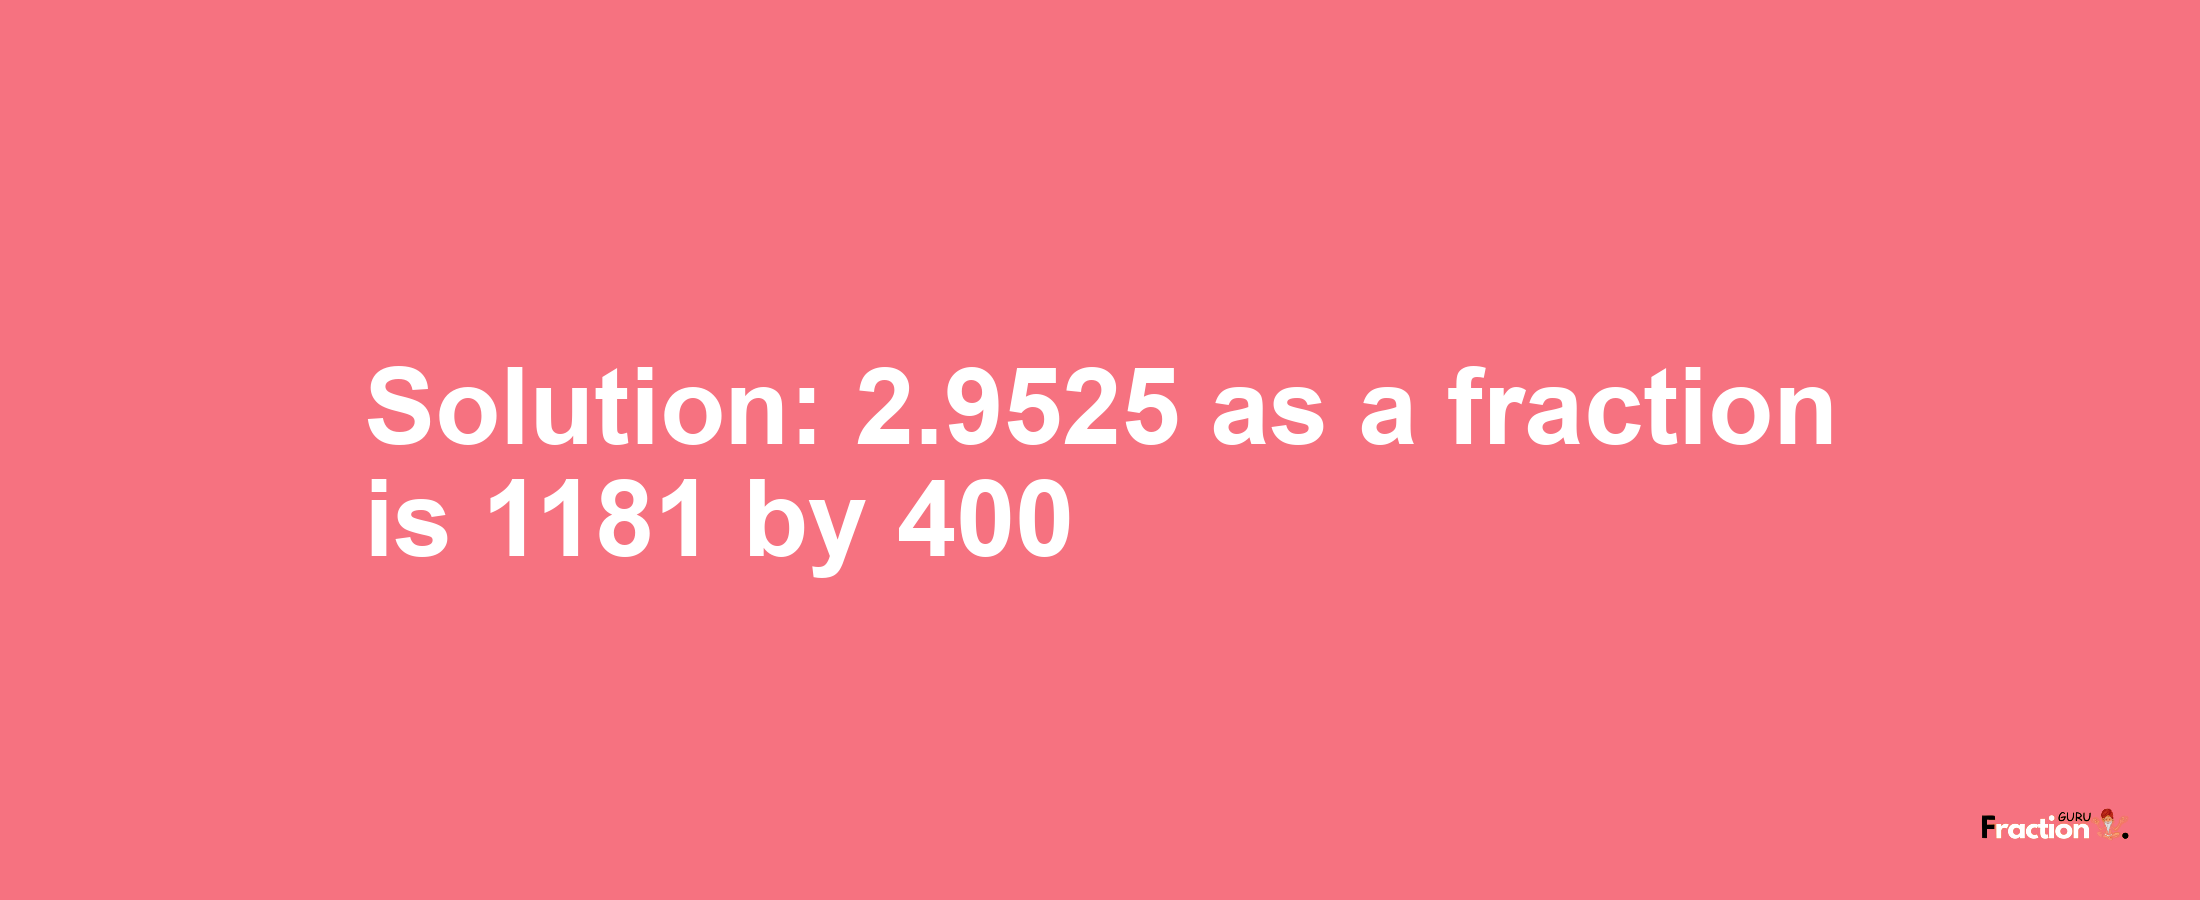 Solution:2.9525 as a fraction is 1181/400